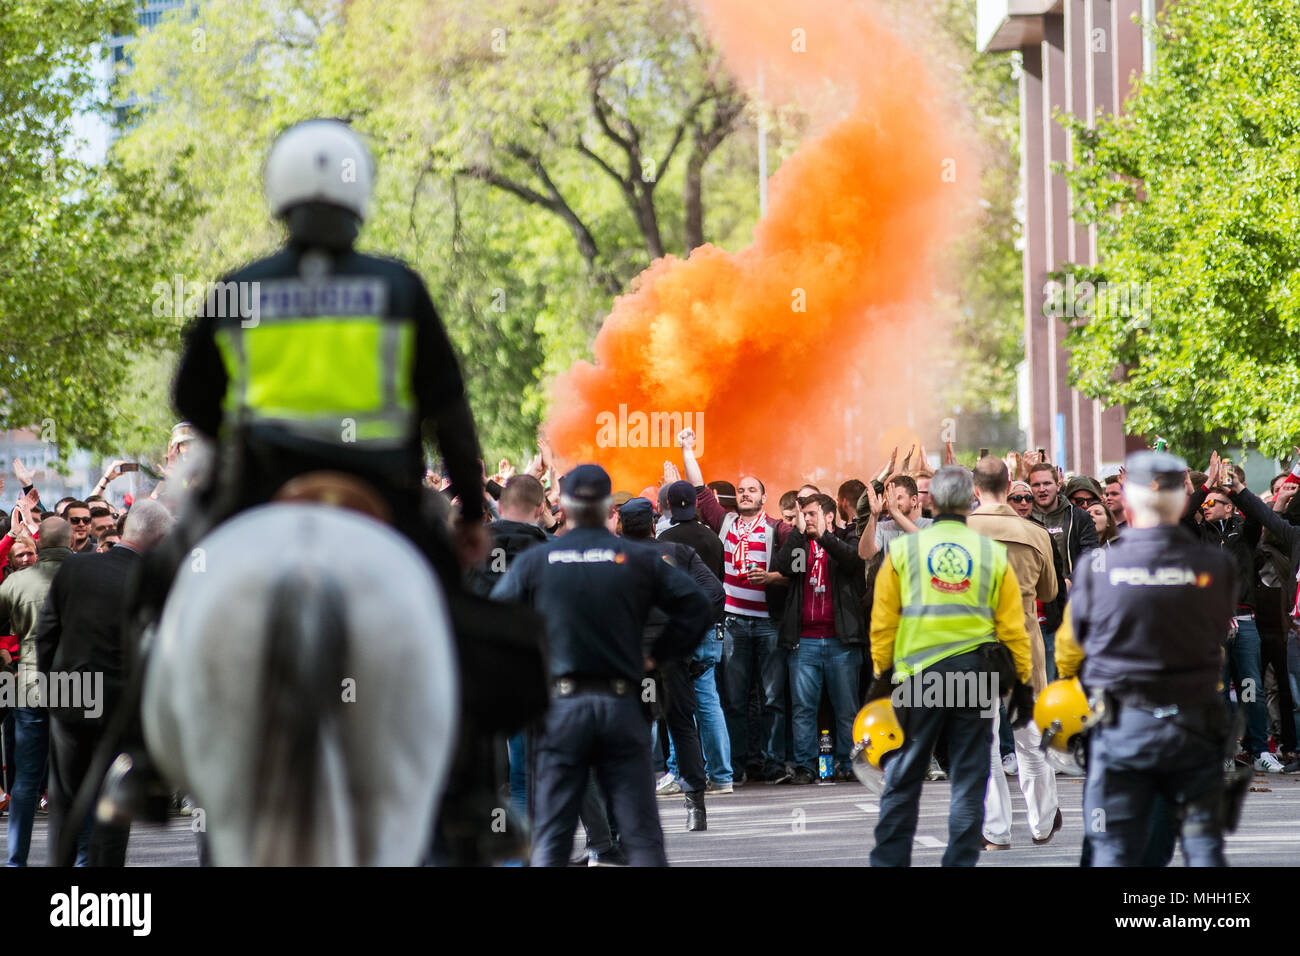 Madrid, Spain. 1st May, 2018. Bayern Munich fans with smoke bombs march to Santiago Bernabeu Stadium escorted by police ahead of Champions League match against Real Madrid, in Madrid, Spain. Credit: Marcos del Mazo/Alamy Live News Stock Photo